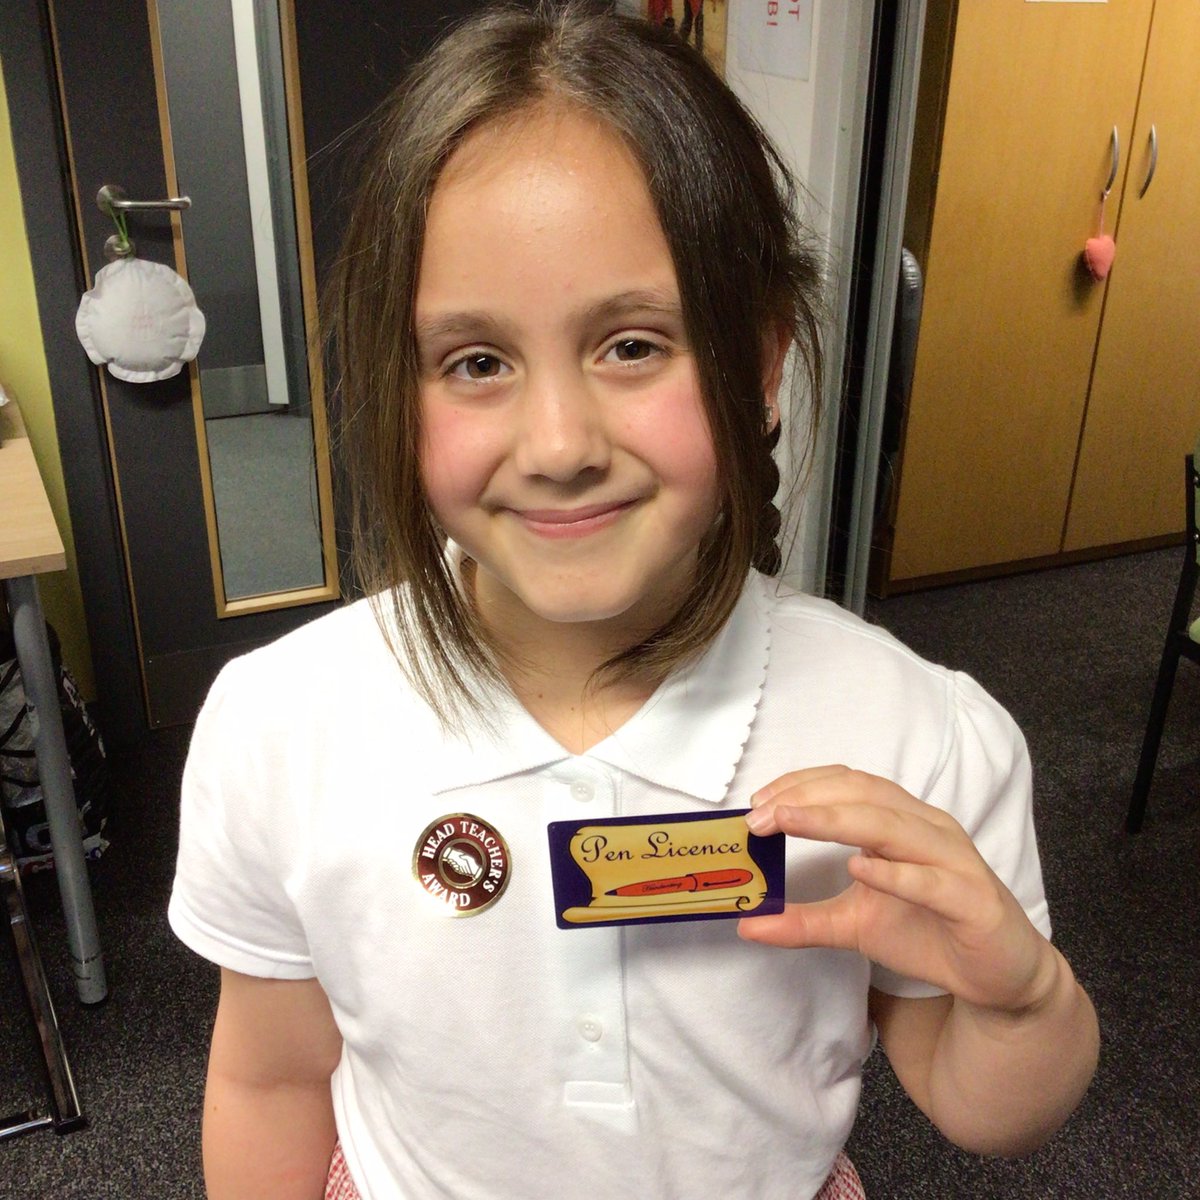 A pen licence for this superstar today! 🤩 Well done! 🖊️👏🏼